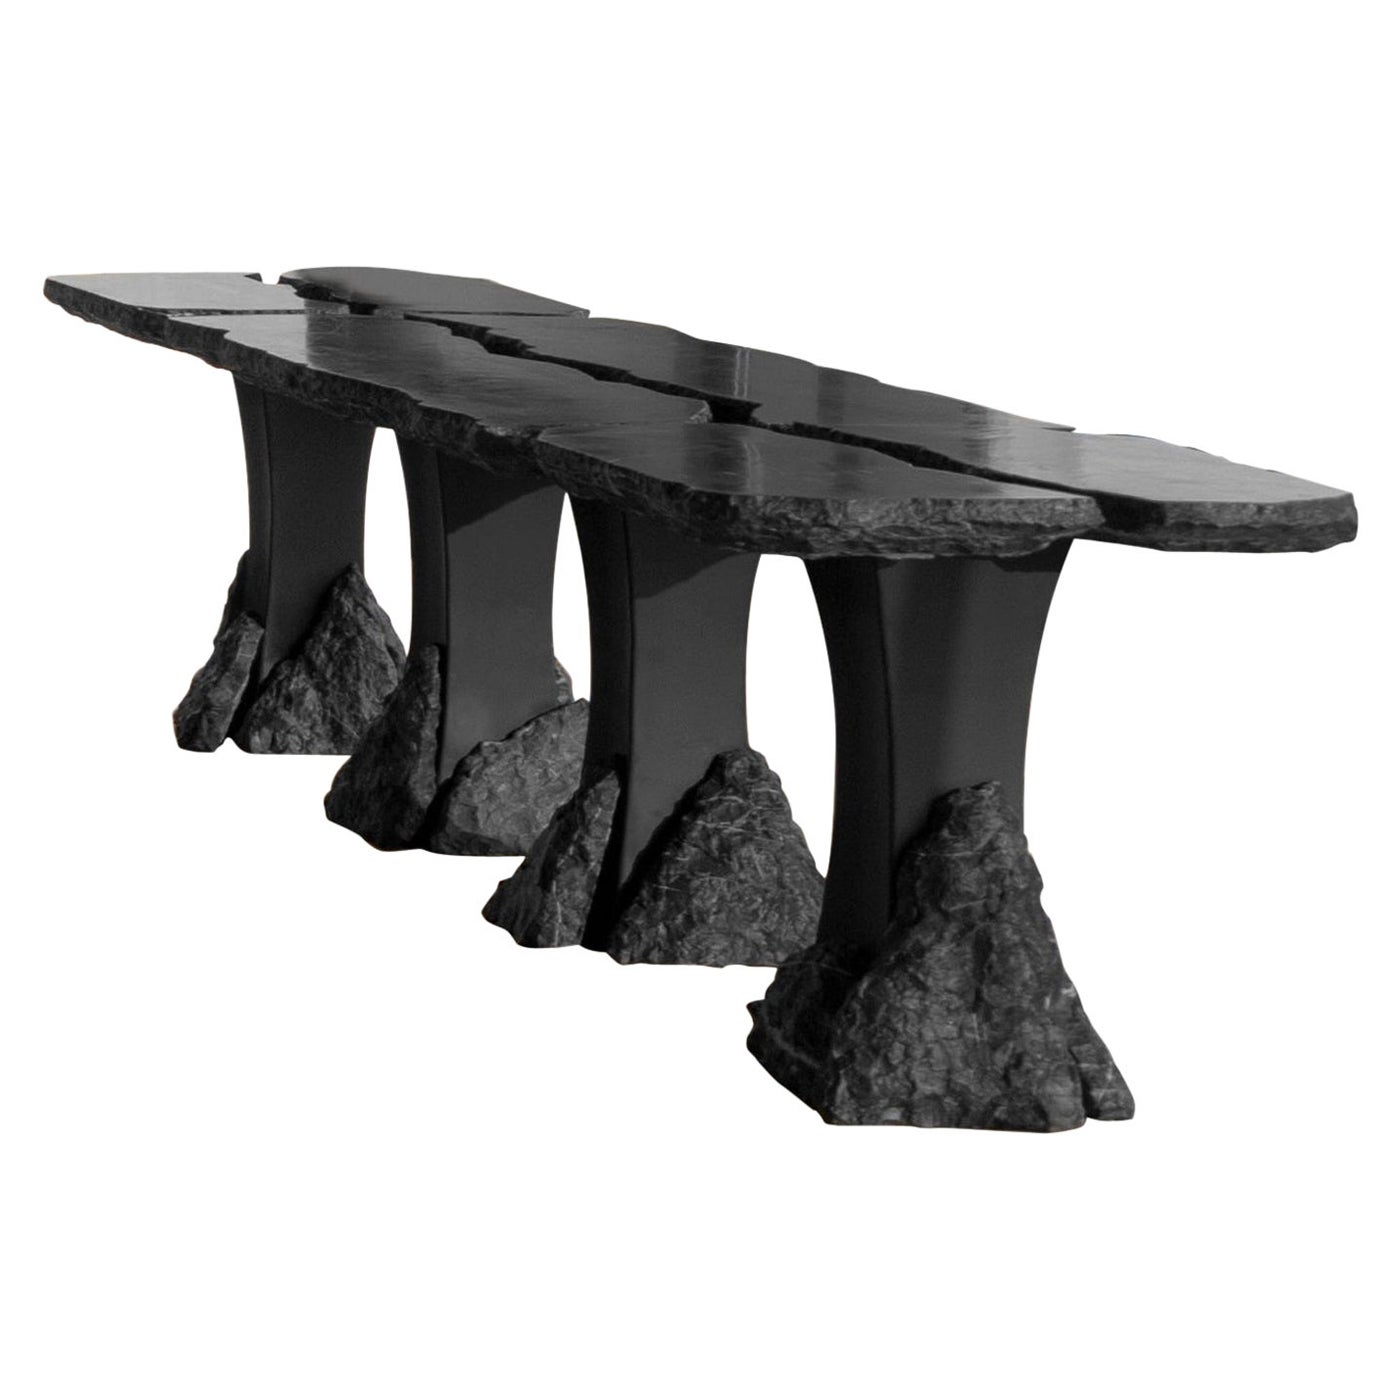 Set of 3 Divergente Tables by Andres Monnier For Sale